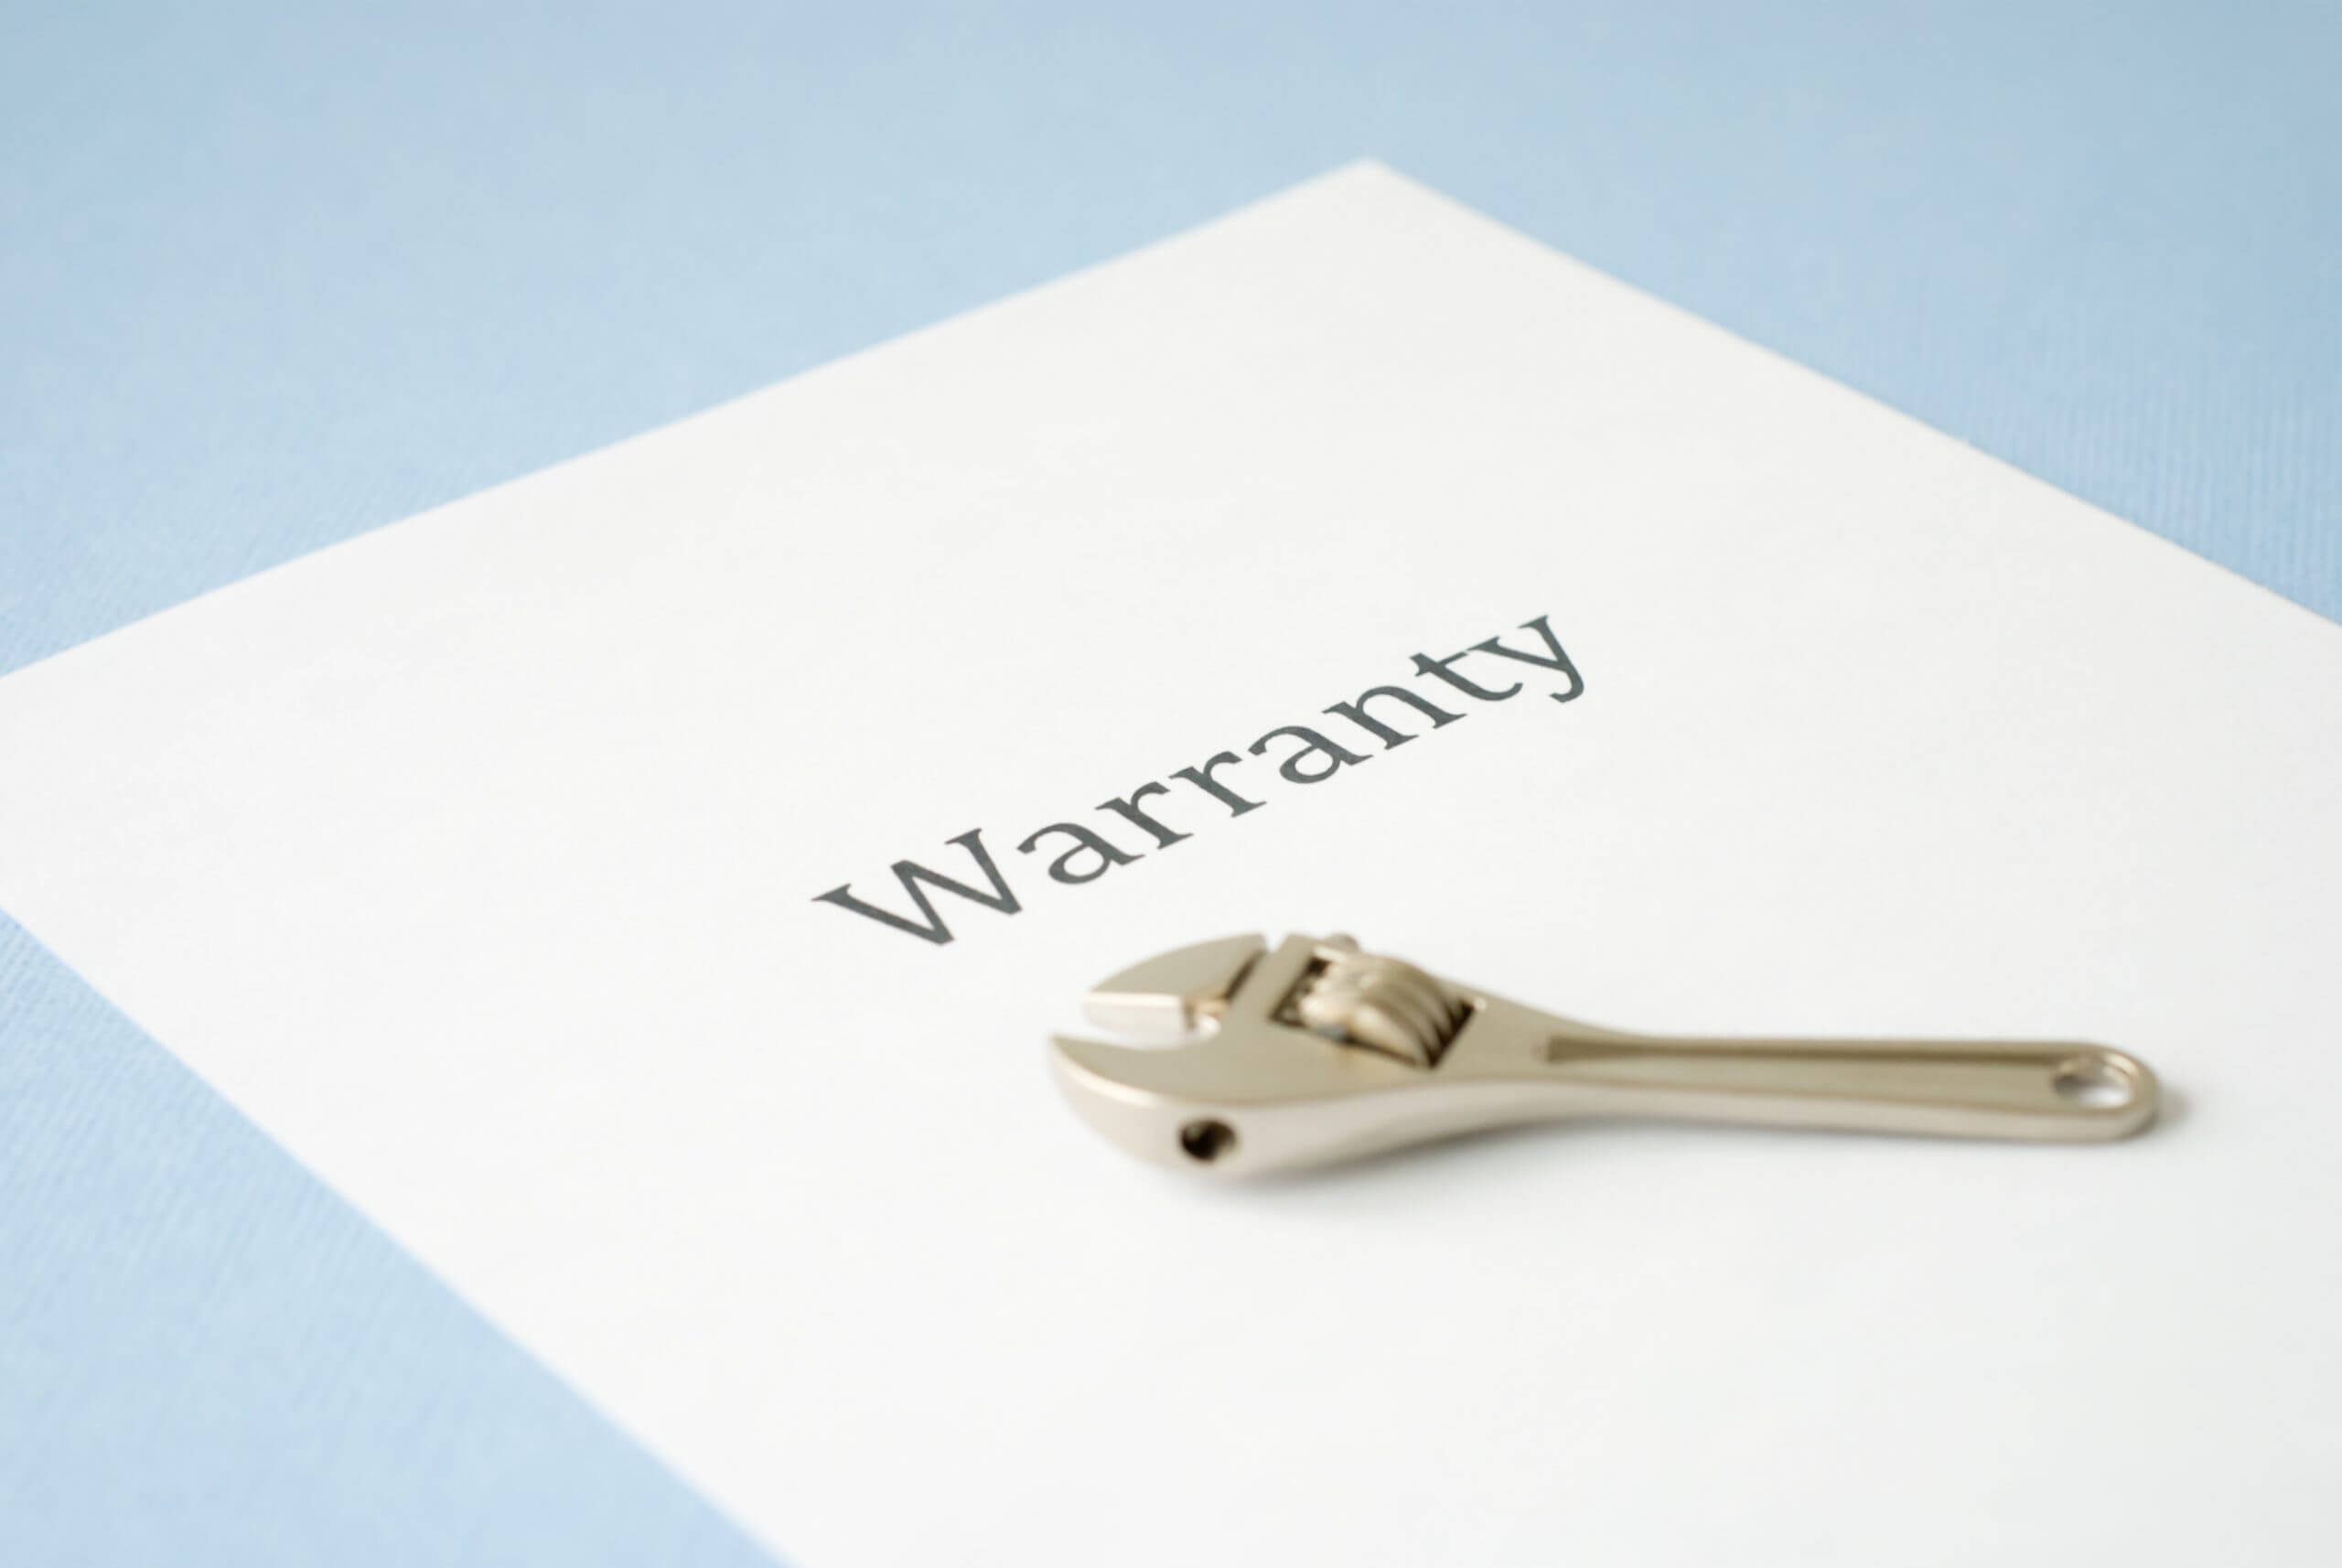 Word " Warranty" printed on a white paper